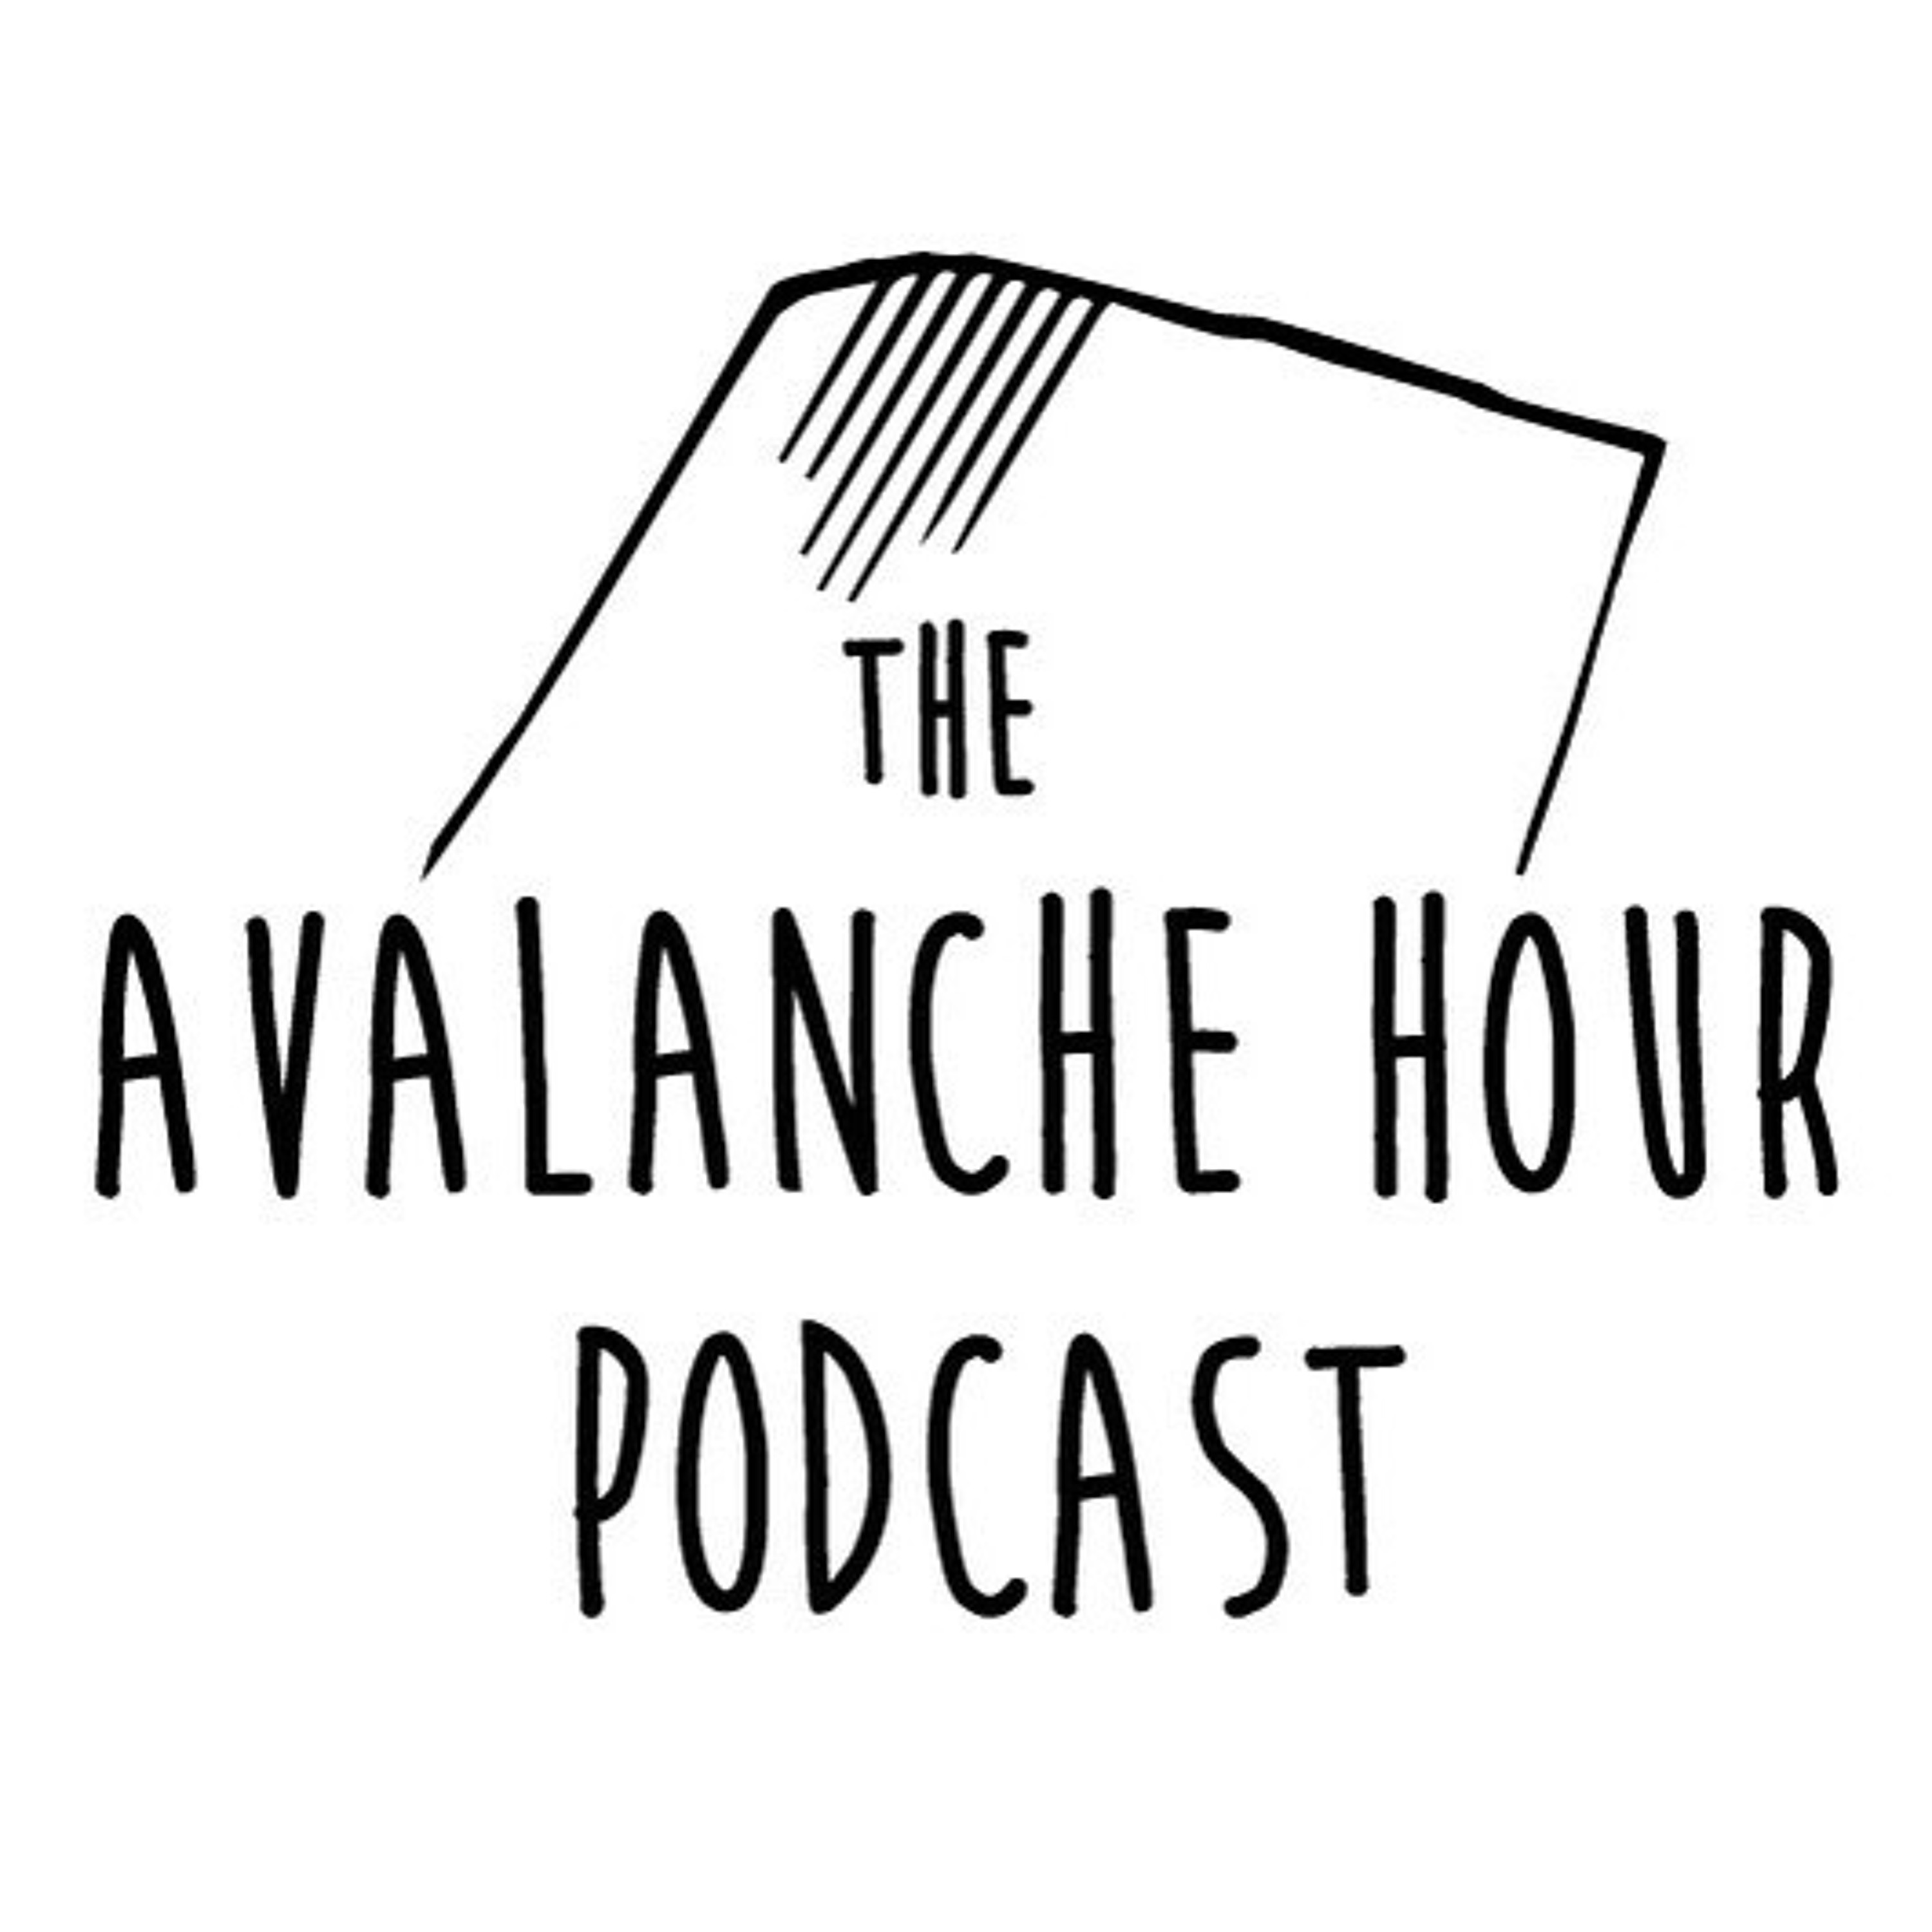 The Avalanche Hour Podcast Episode 3.19 Roger Atkins